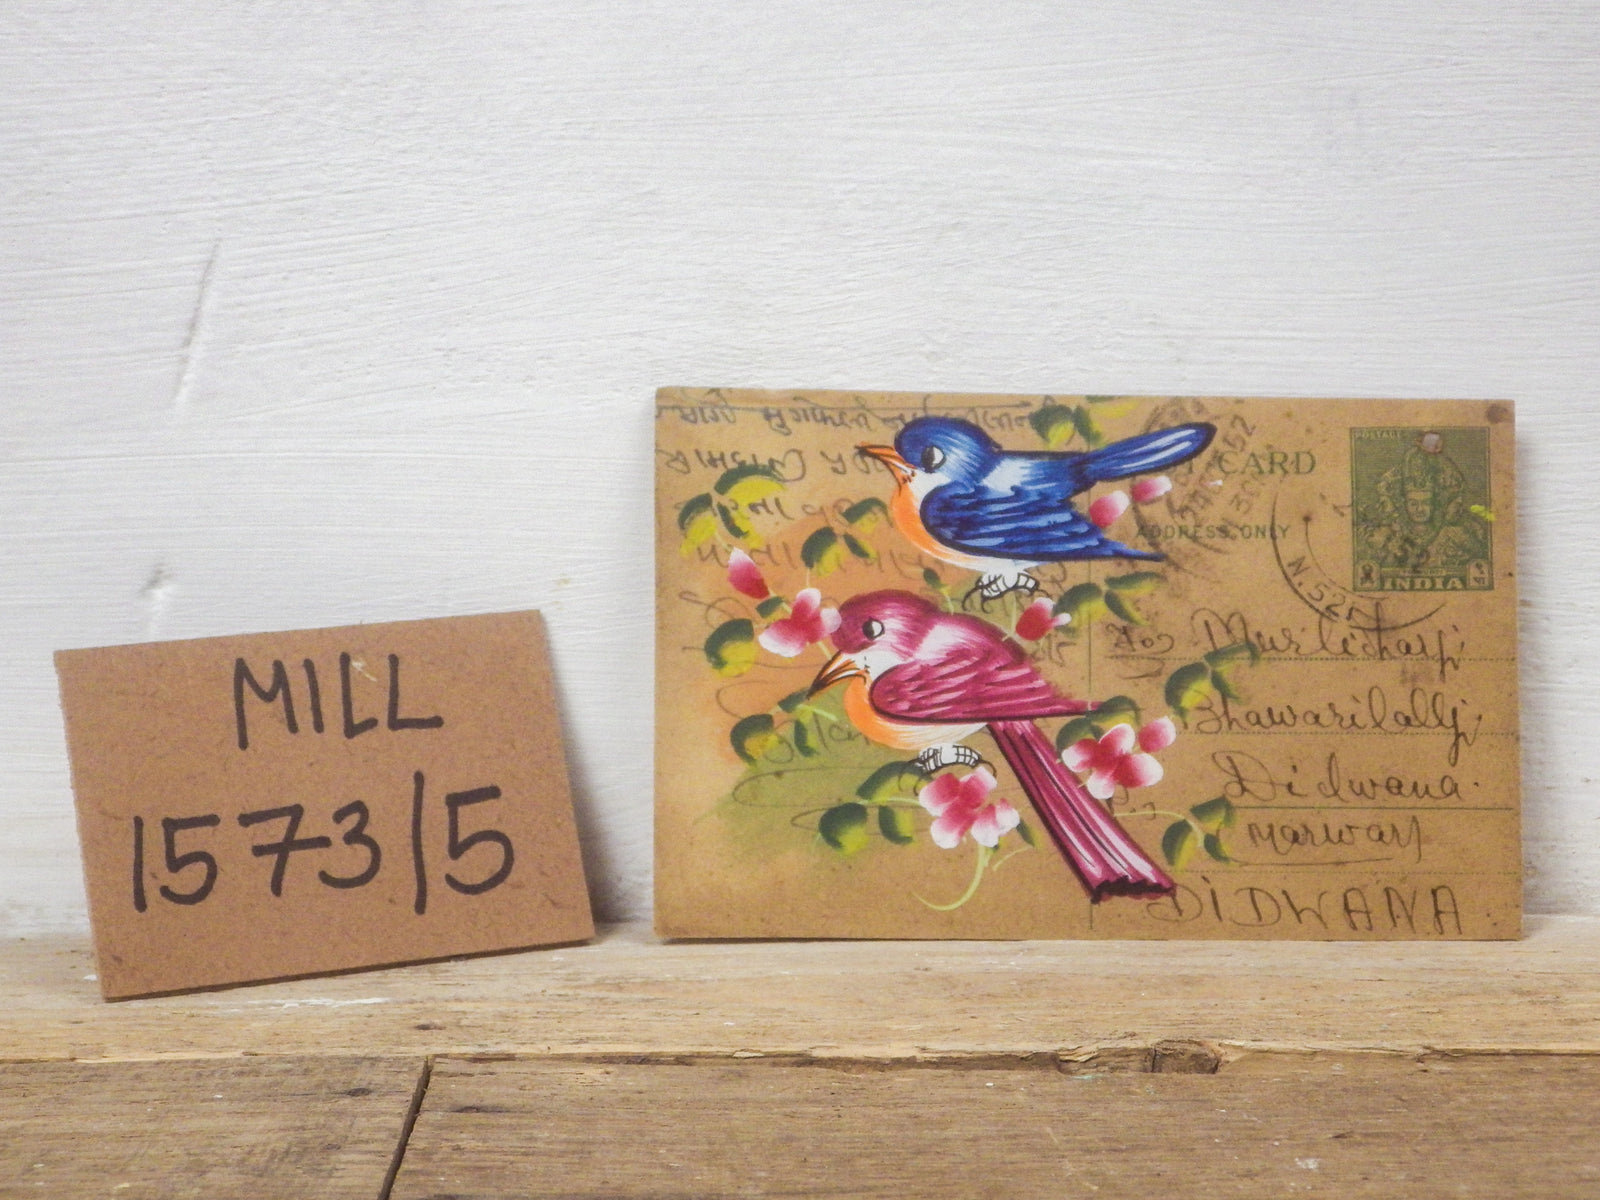 MILL-1573/5 Hand Painted Old Post Card C18